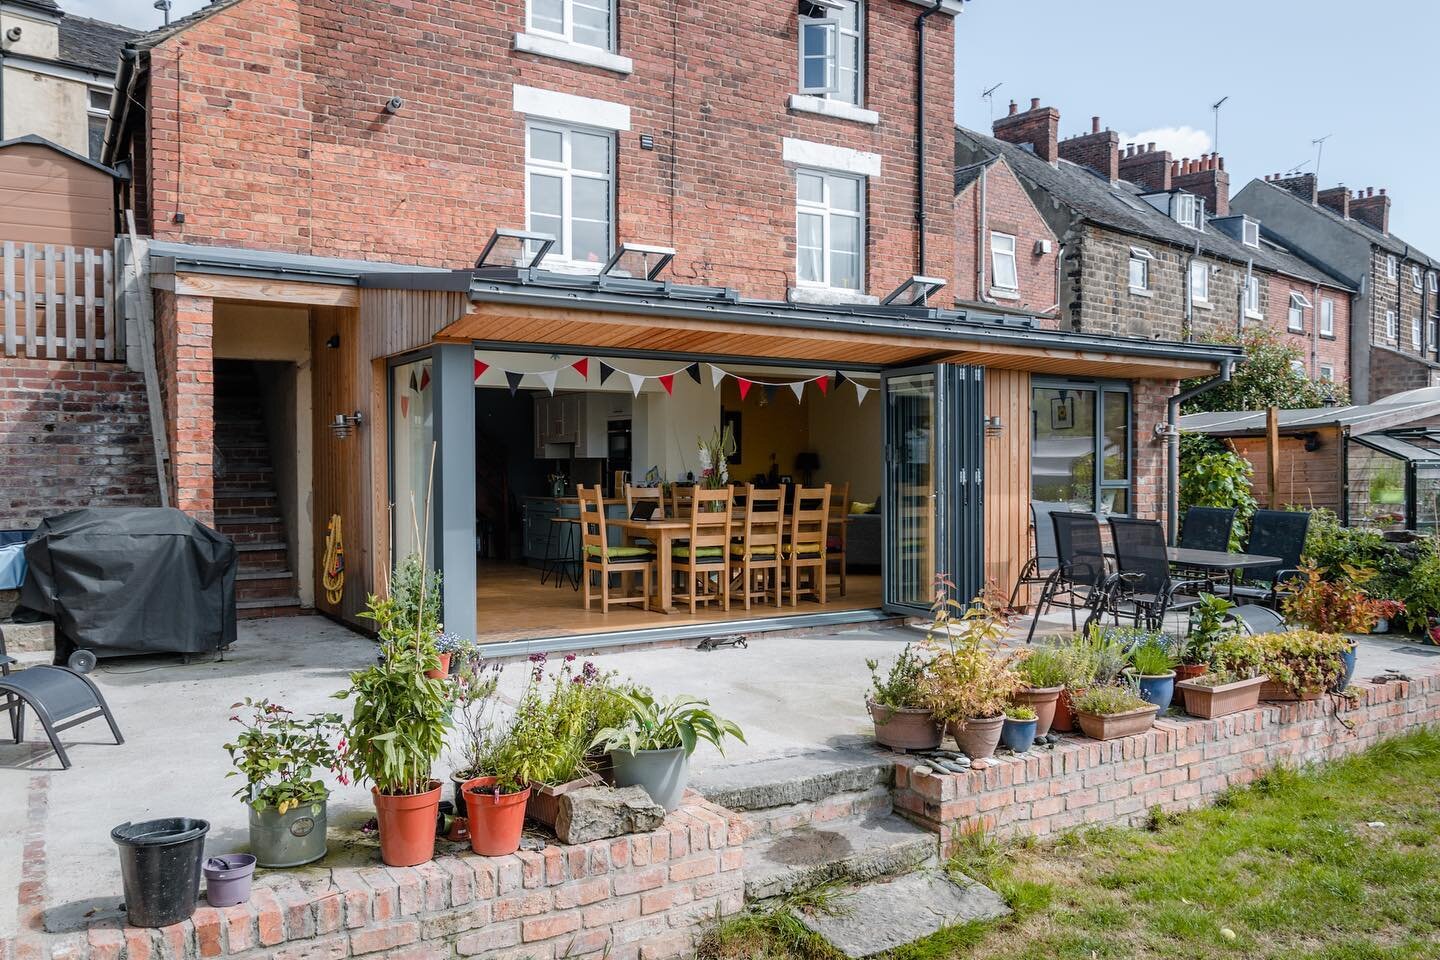 Located in the historic centre of Belper and within a World Heritage Site Buffer Zone, this project replaces a conservatory and brick built lean-to extension with a design that completely transforms the appearance of the building. See more photos on 